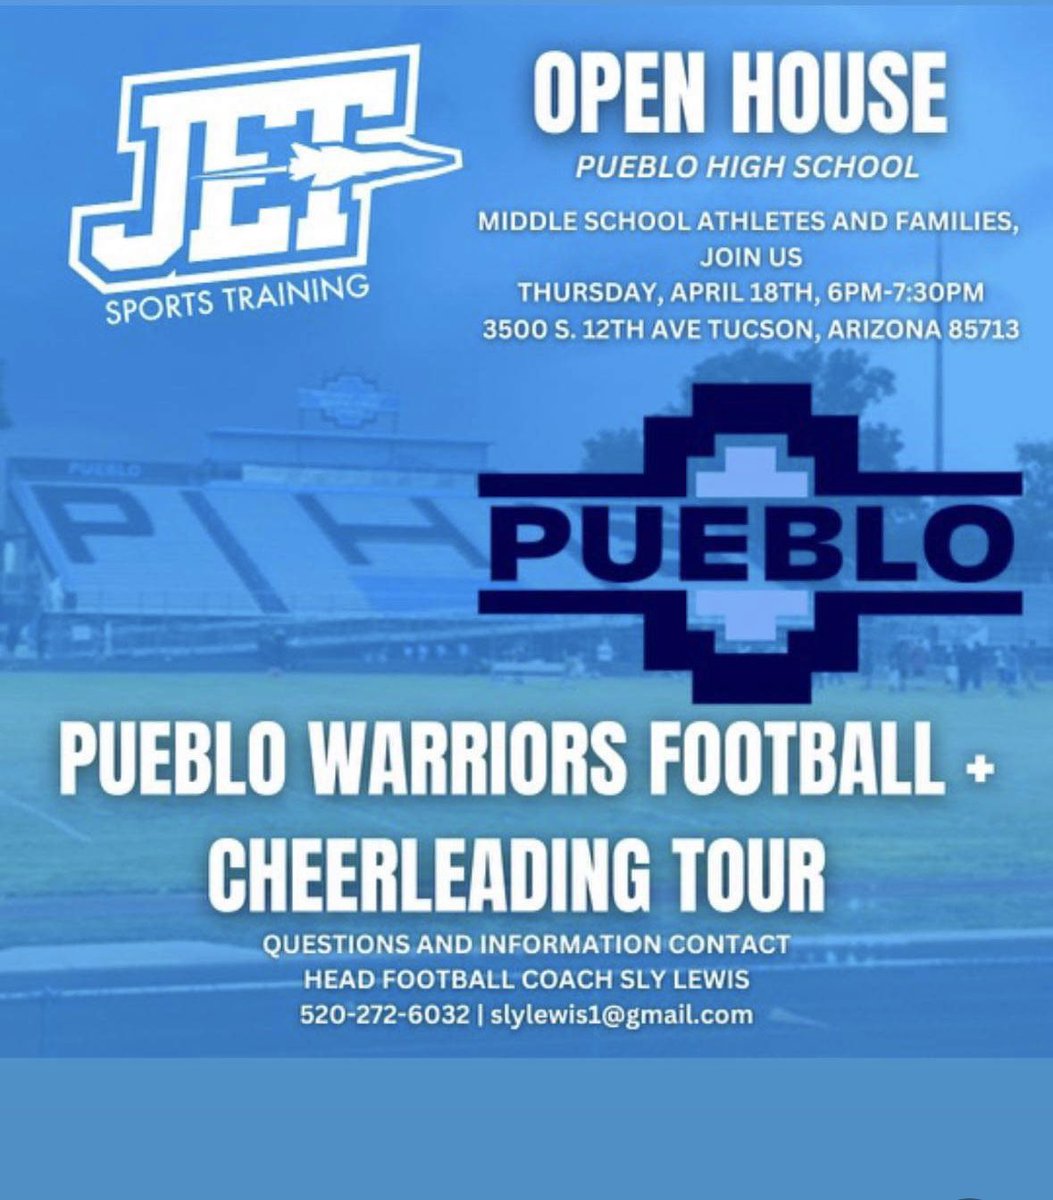 Here’s an upcoming event we look forward to seeing your student athletes and families coming out to see what we offer with academics and athletics here at Pueblo.